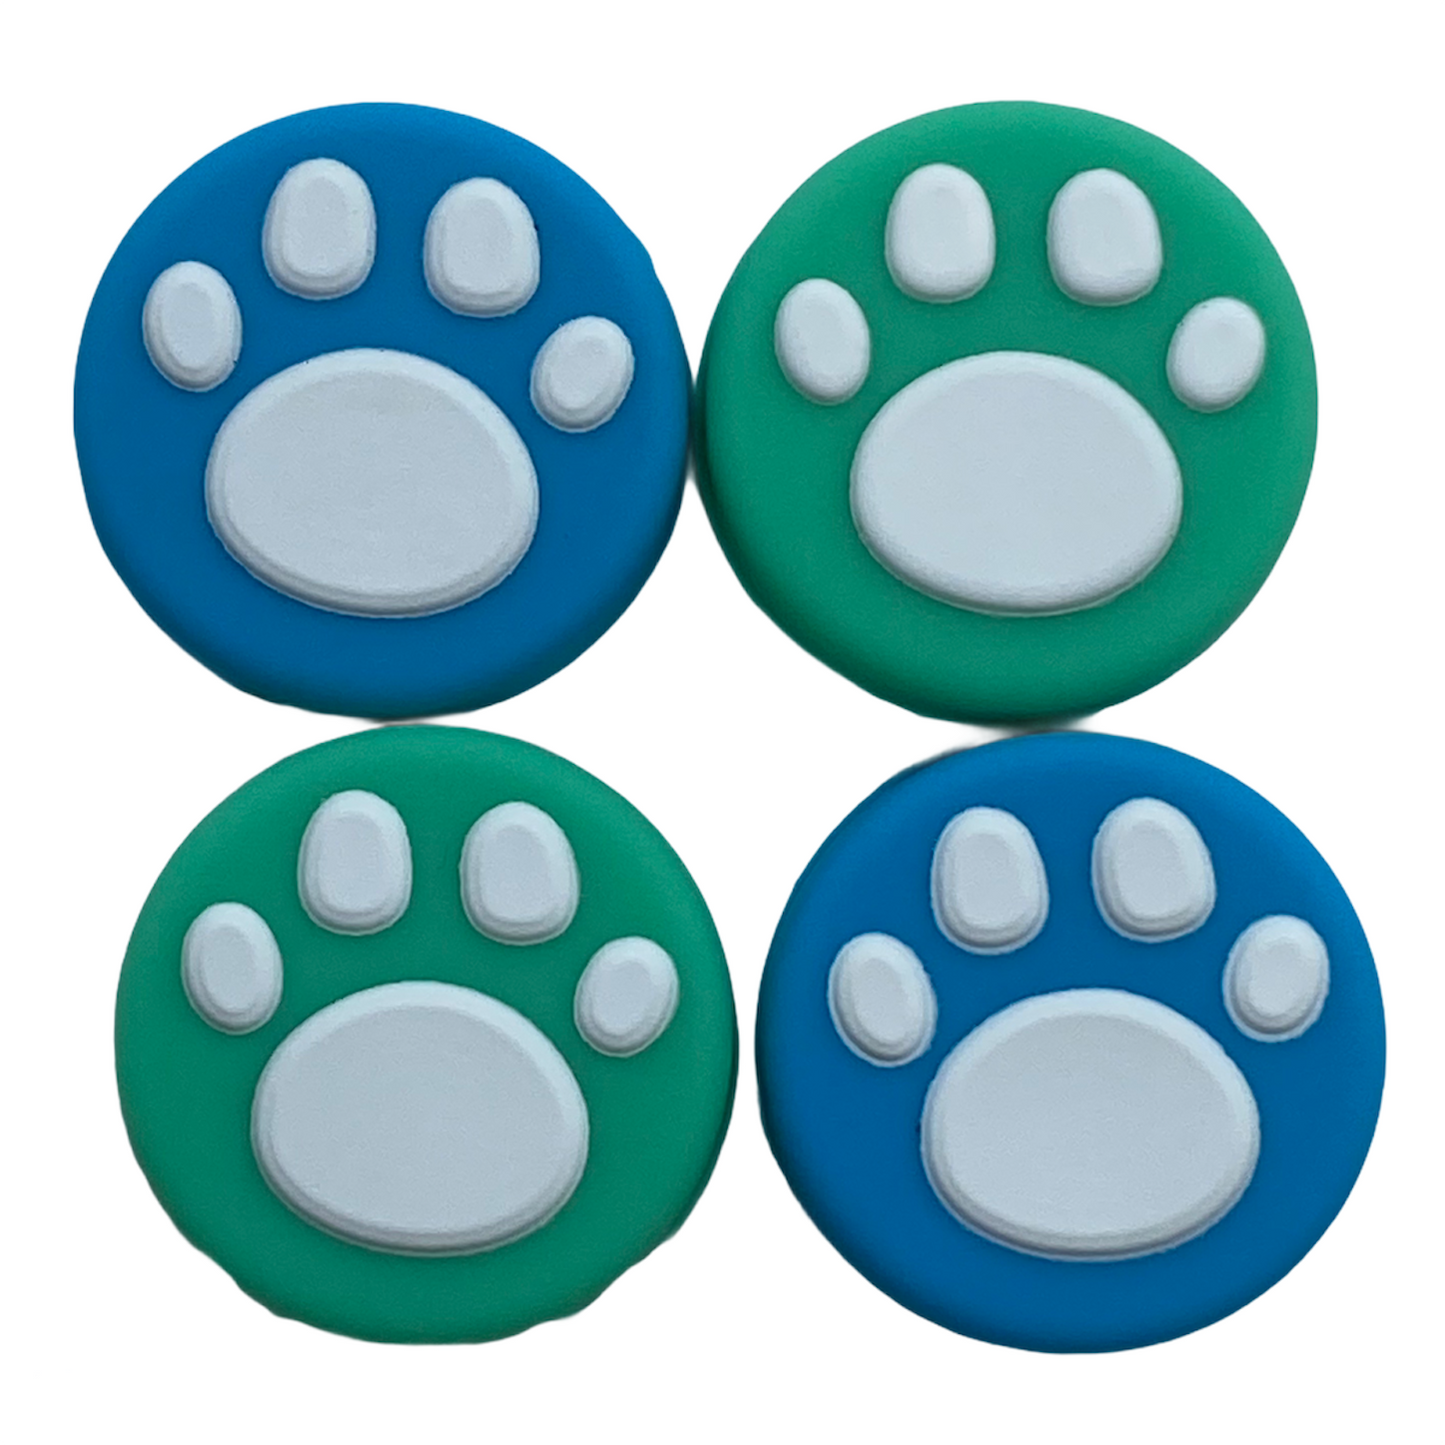 JenDore Blue Green 4Pcs Paw Silicone Thumb Grip Caps for Nintendo Switch